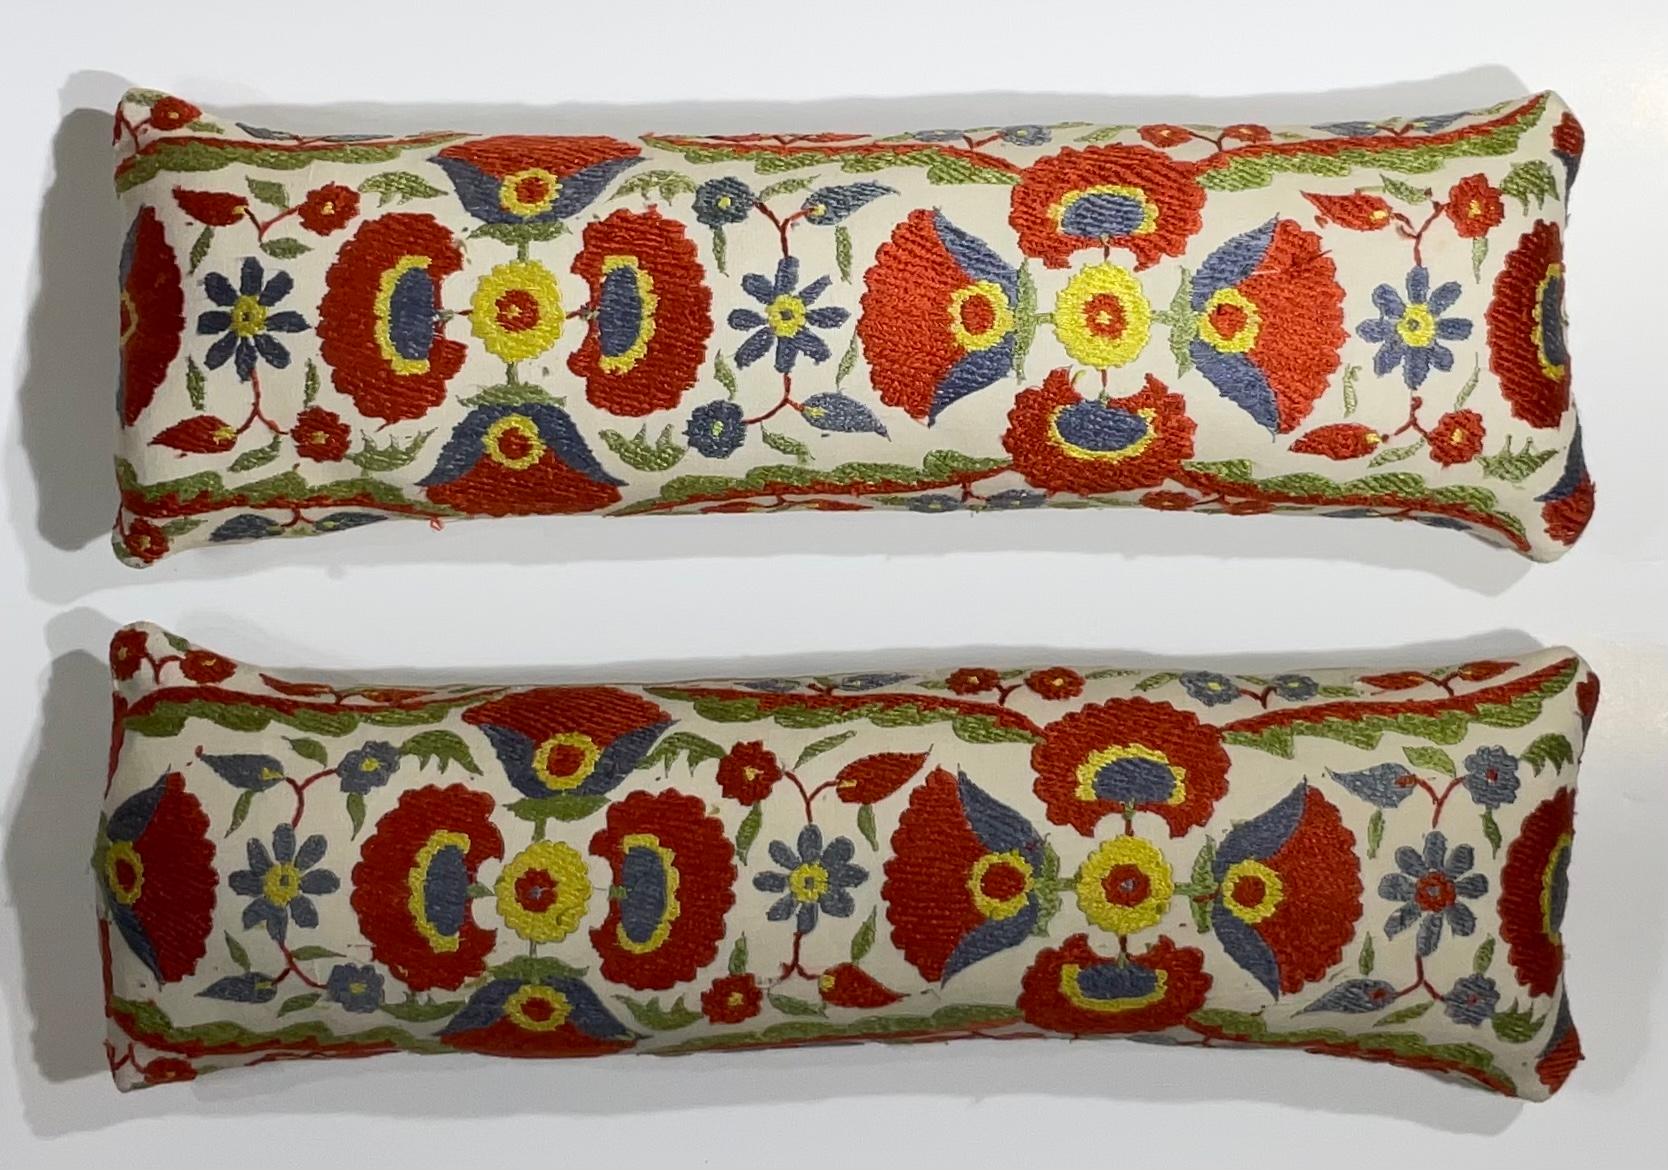 Beautiful pair of pillows made of hand embroidery silk, of colorful flowers and vines on a cream color cotton background.
Fine linen backing, Frash insert.